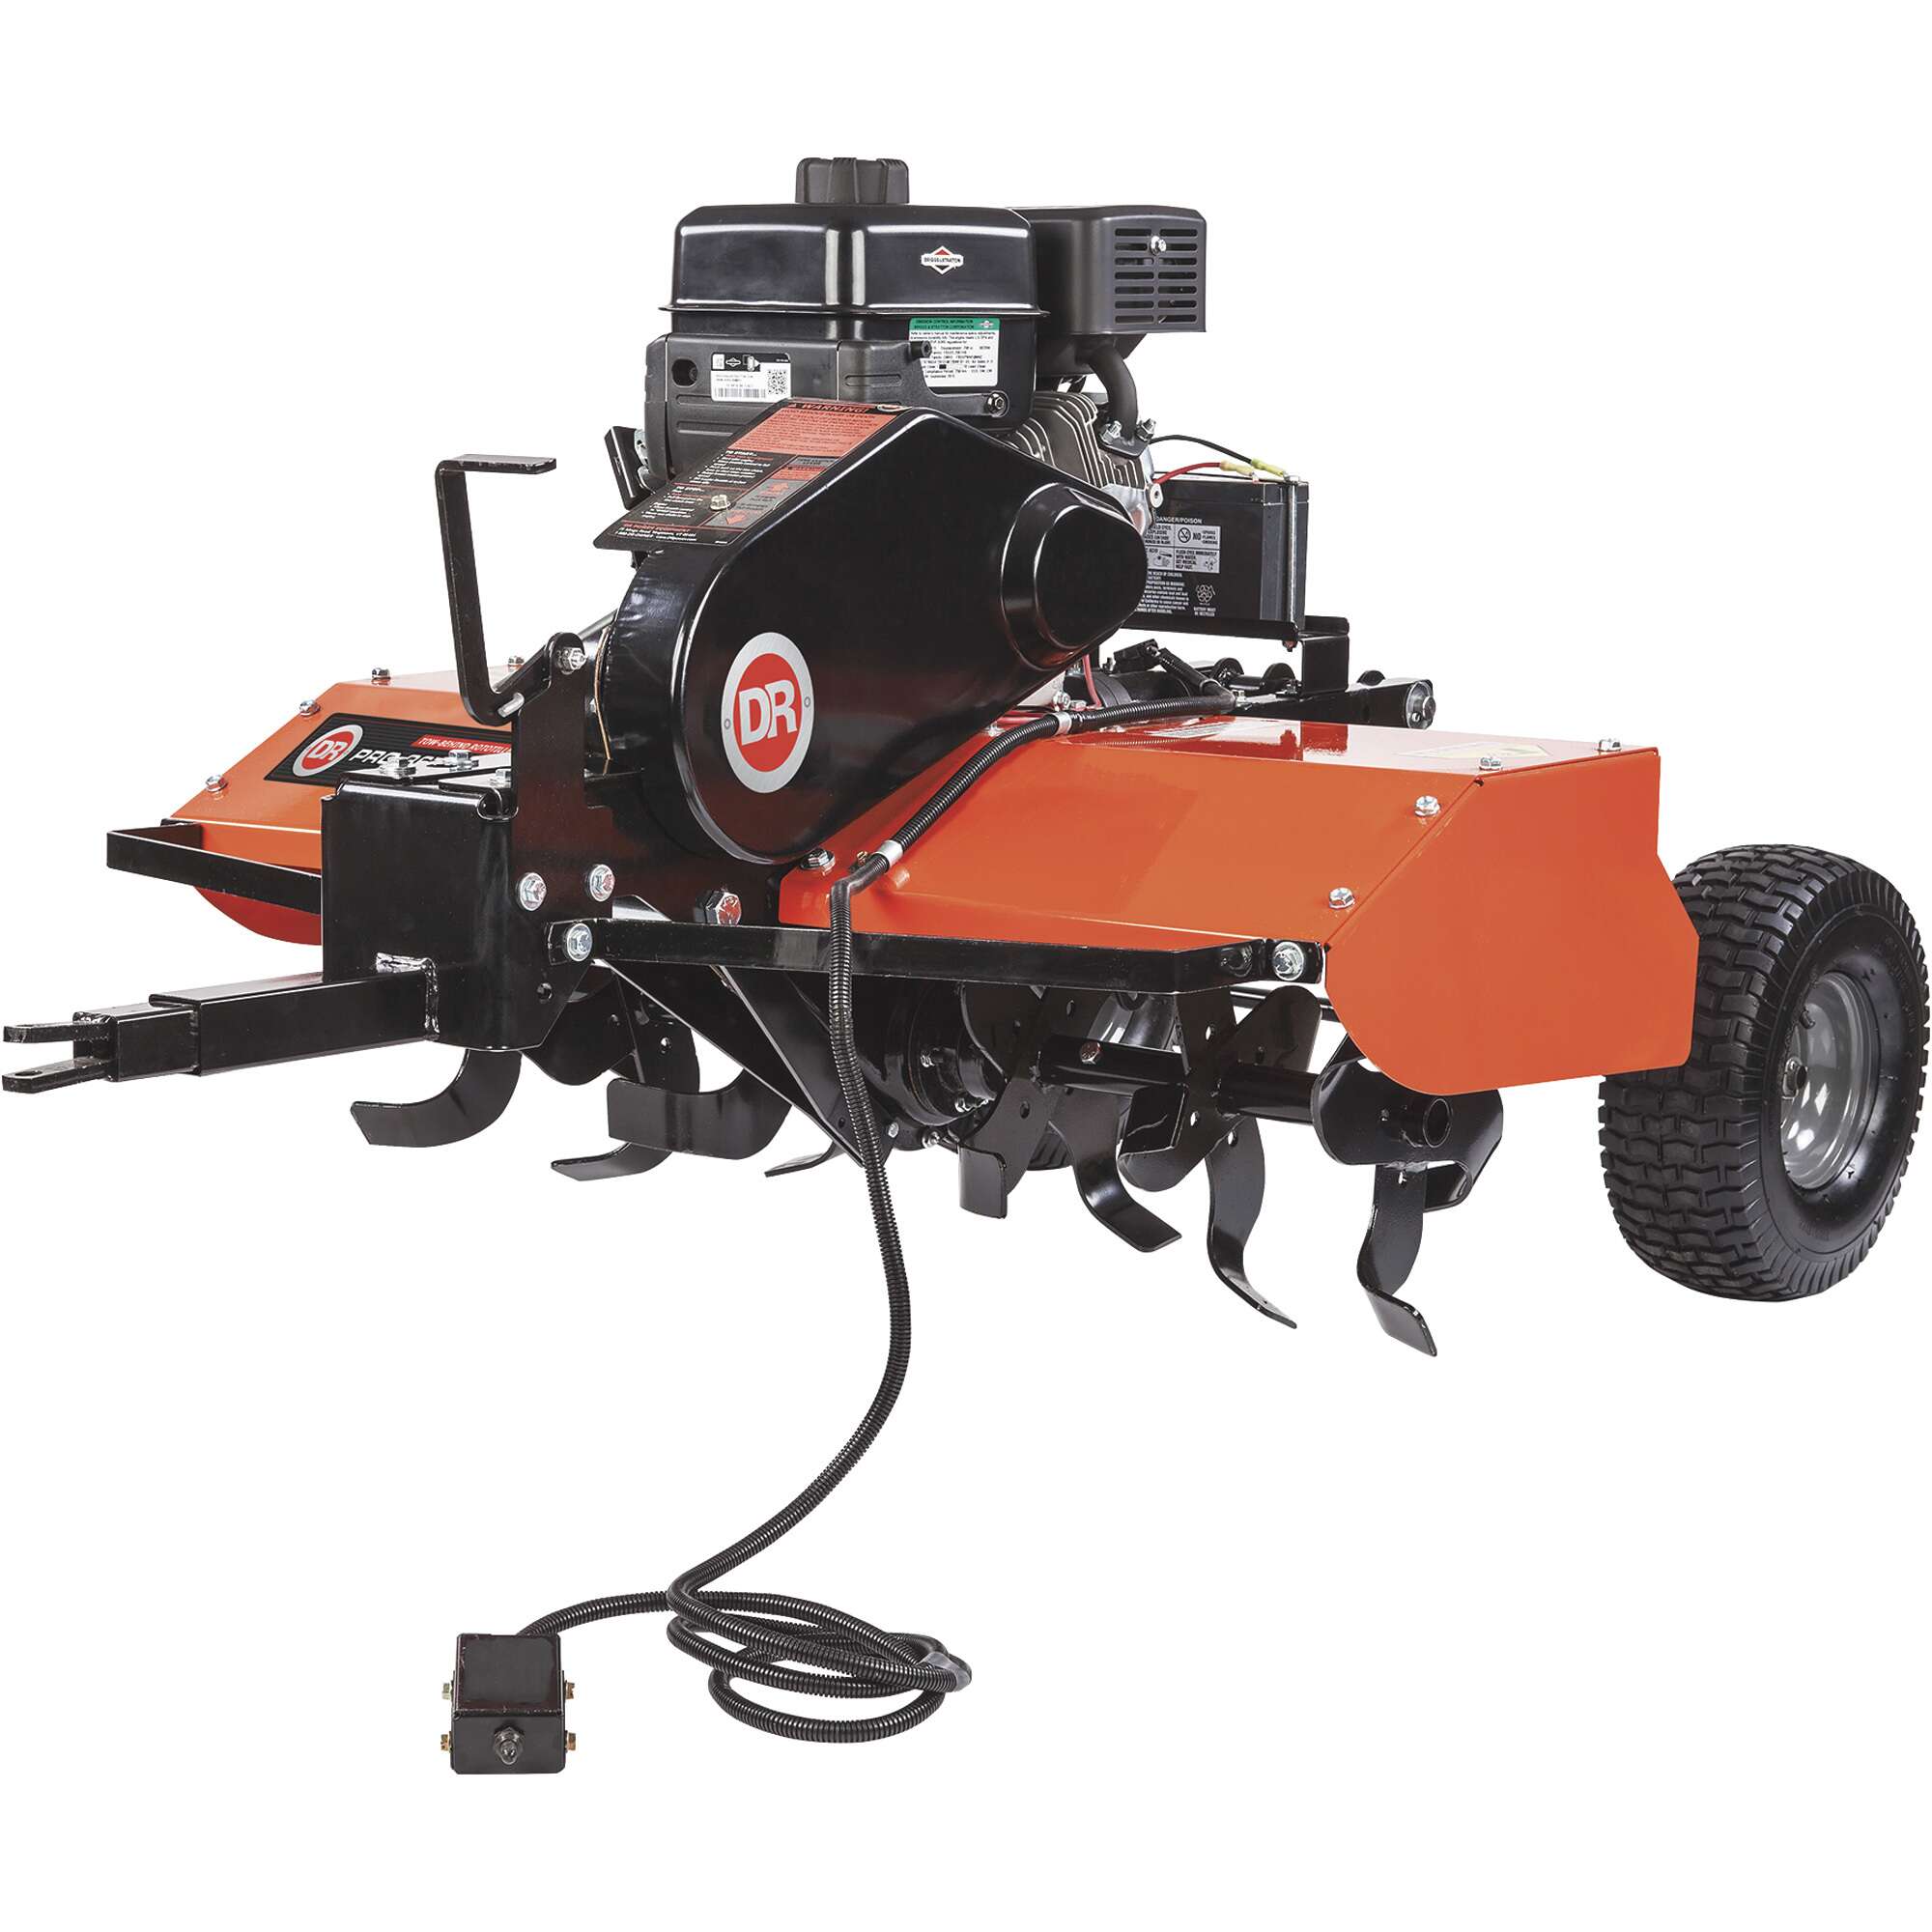 DR Power PRO Tow Behind Rototiller 36in Till Width 6.5 HP Briggs & Stratton Engine